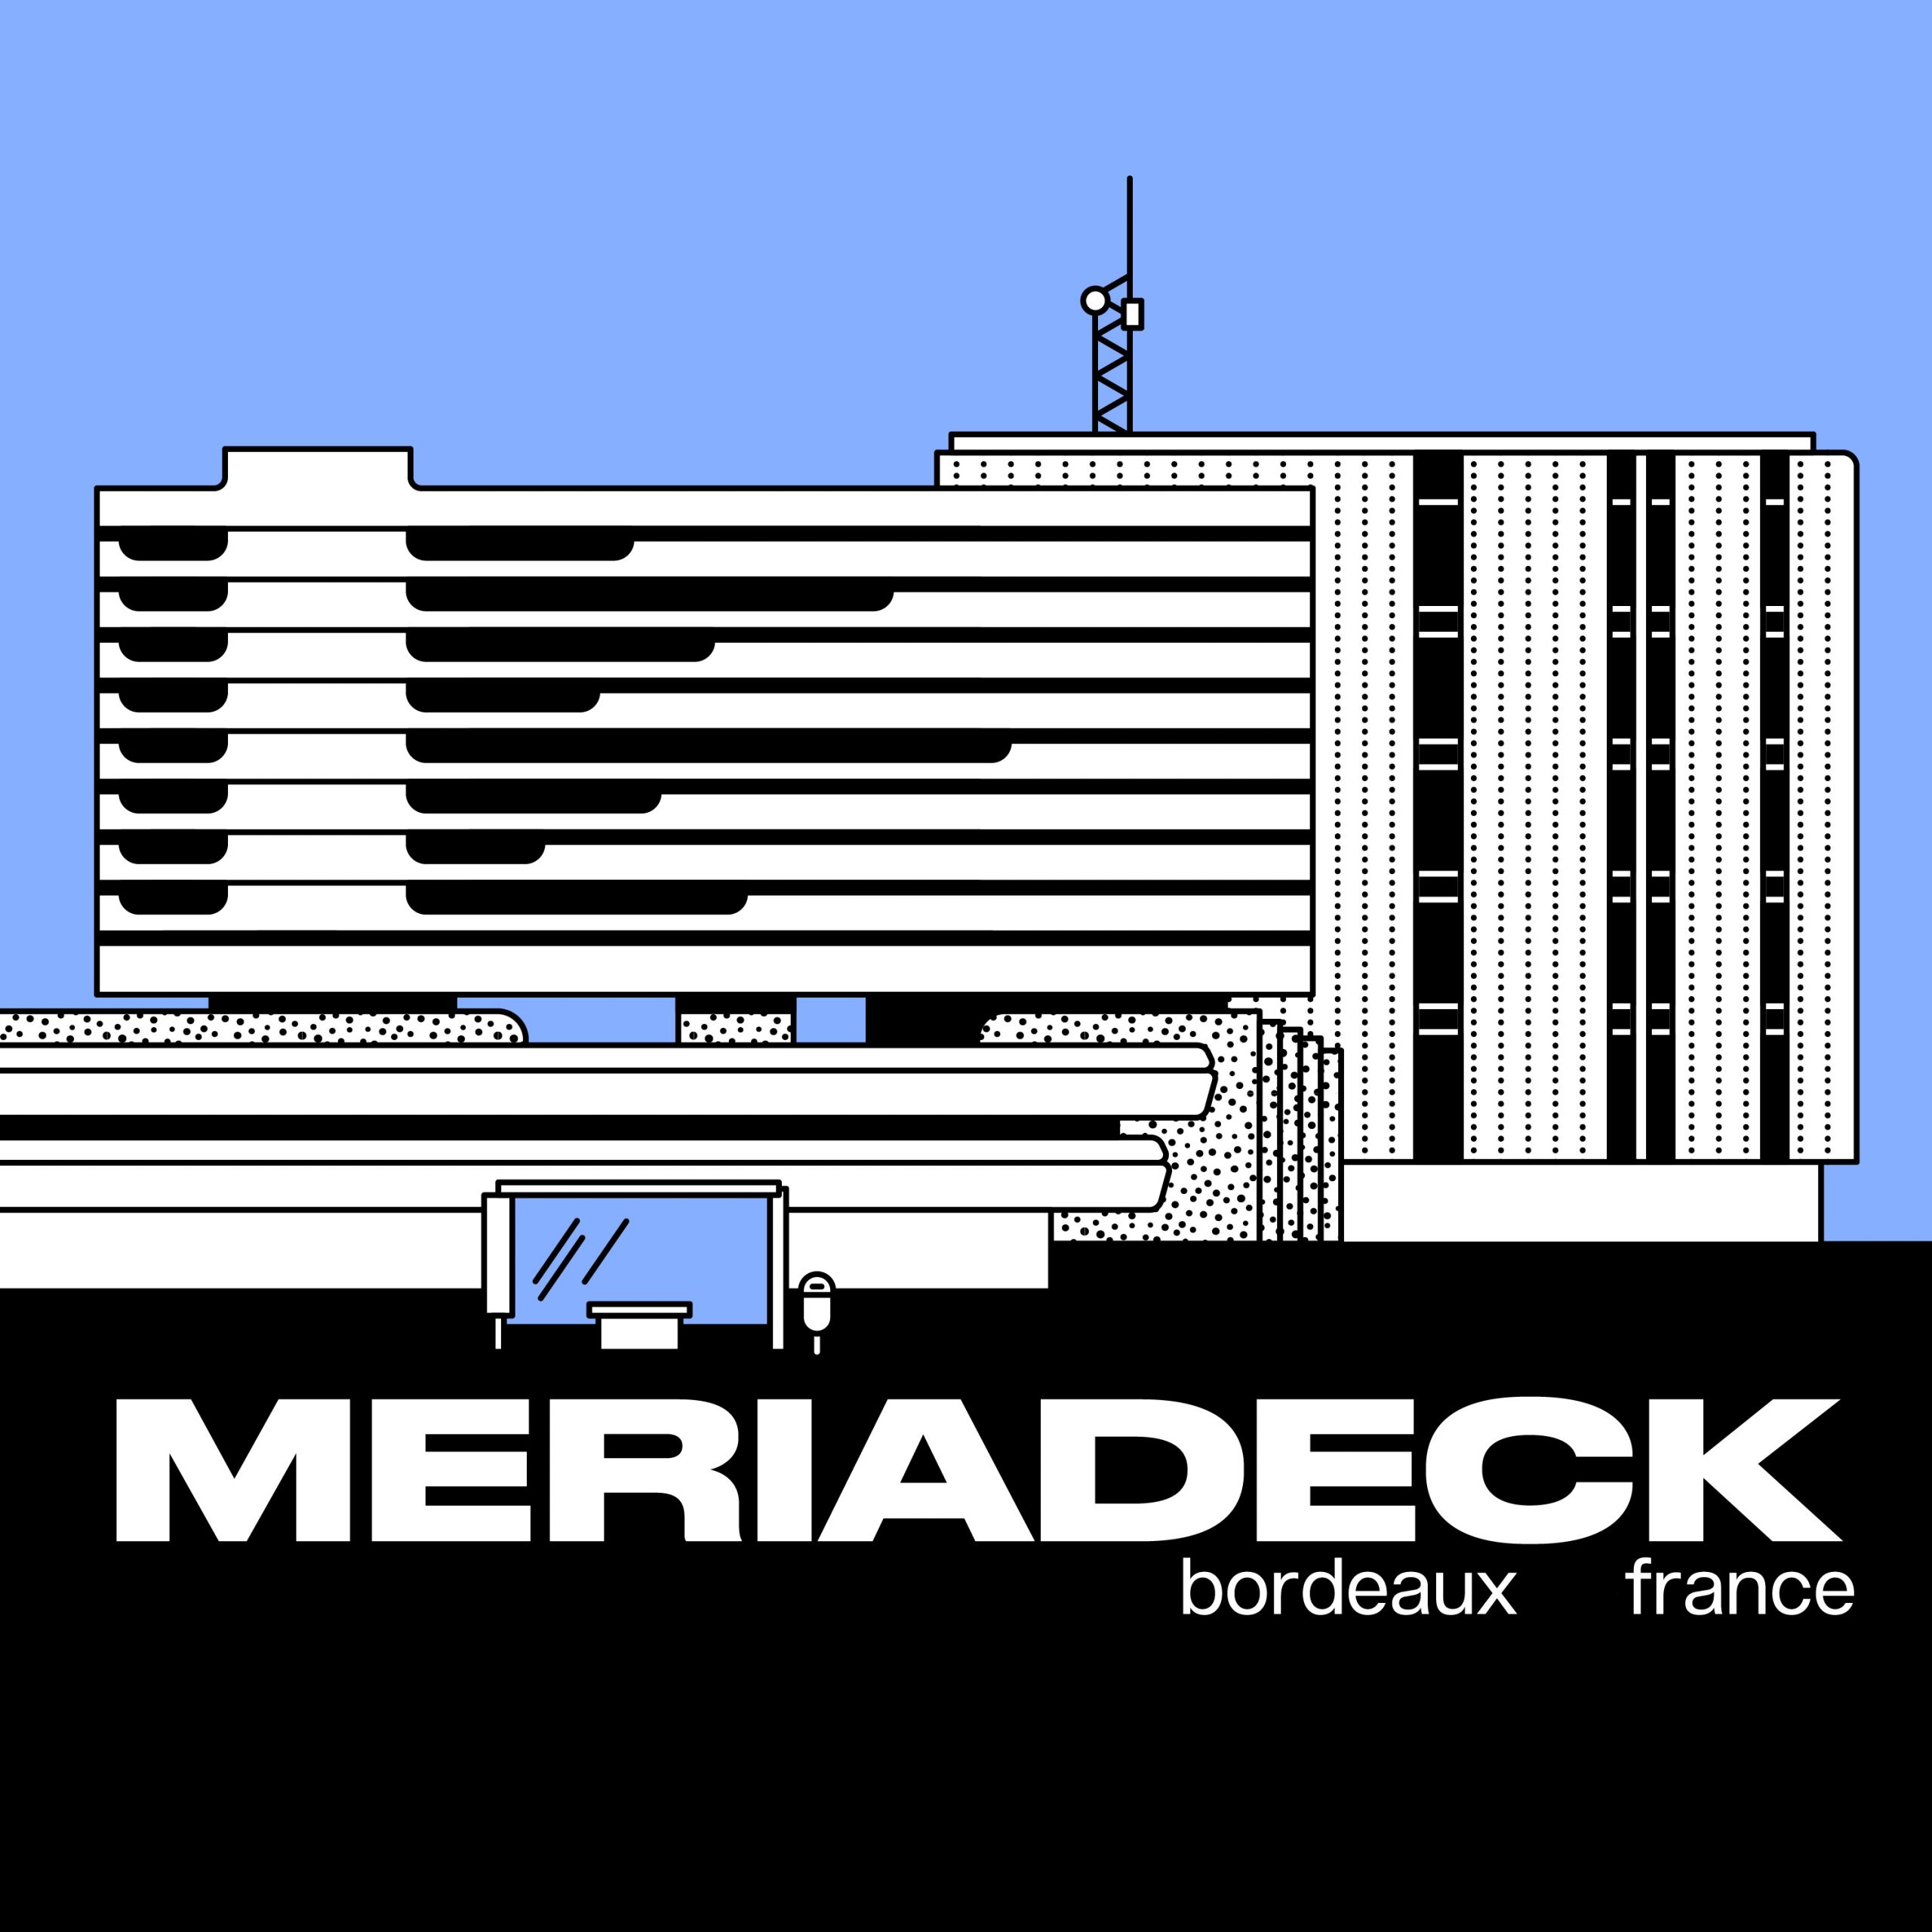 Architectural illustration of a brutalist building at Meriadeck complex in Bordeaux France